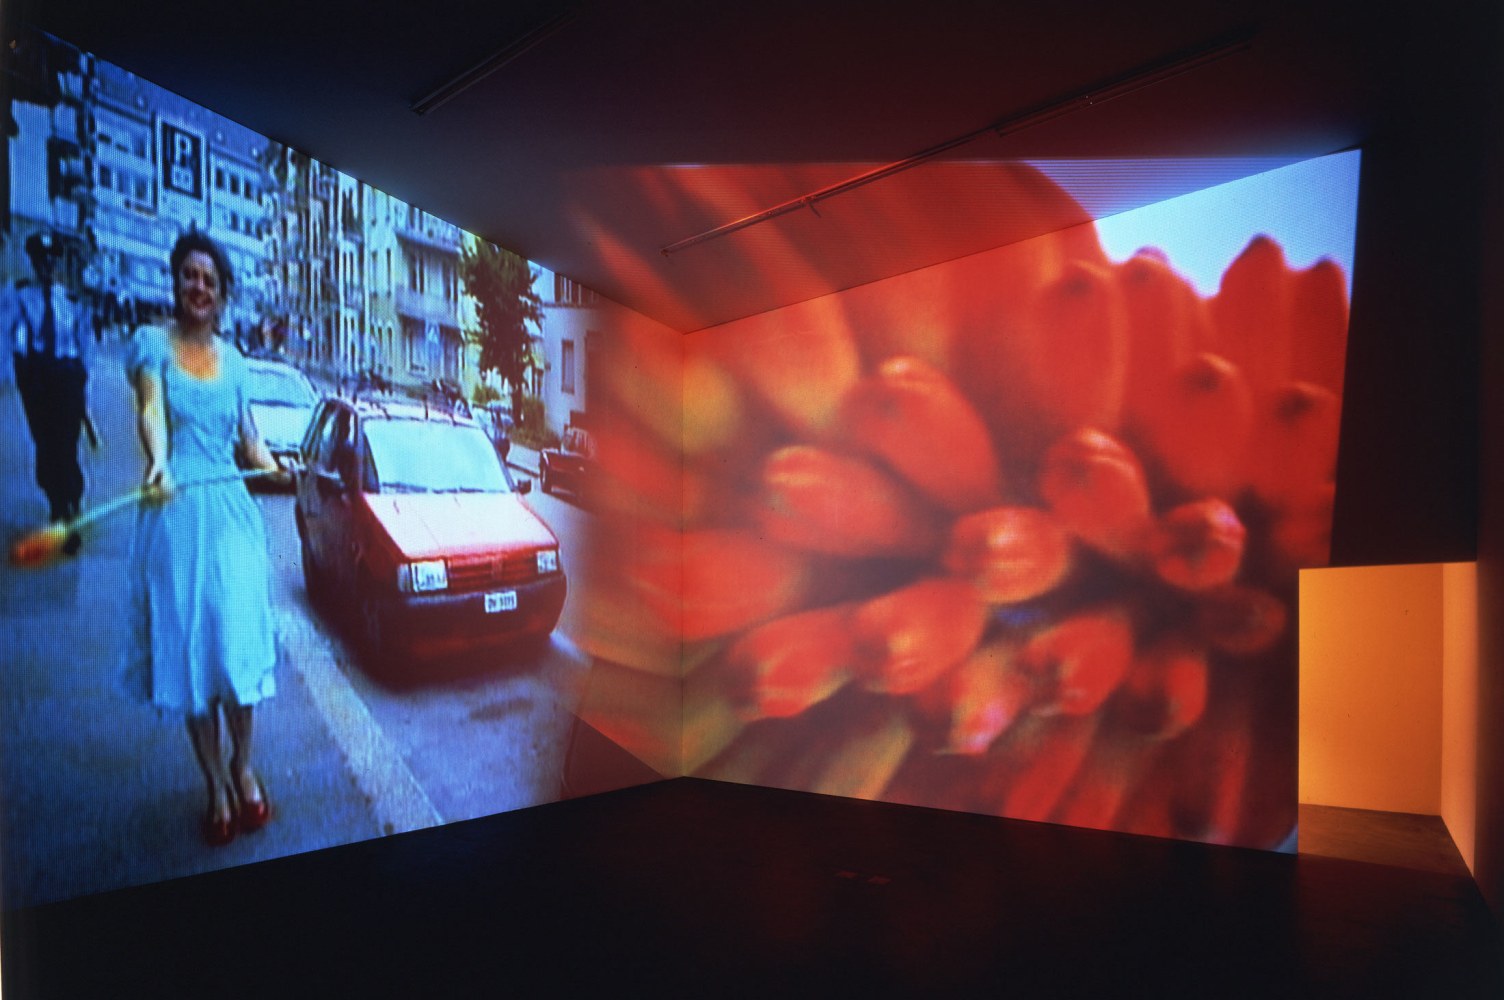 Pipilotti Rist
Ever Is Over All, 1997
Two-channel video, sound
Duration: 8 minutes, 25 seconds